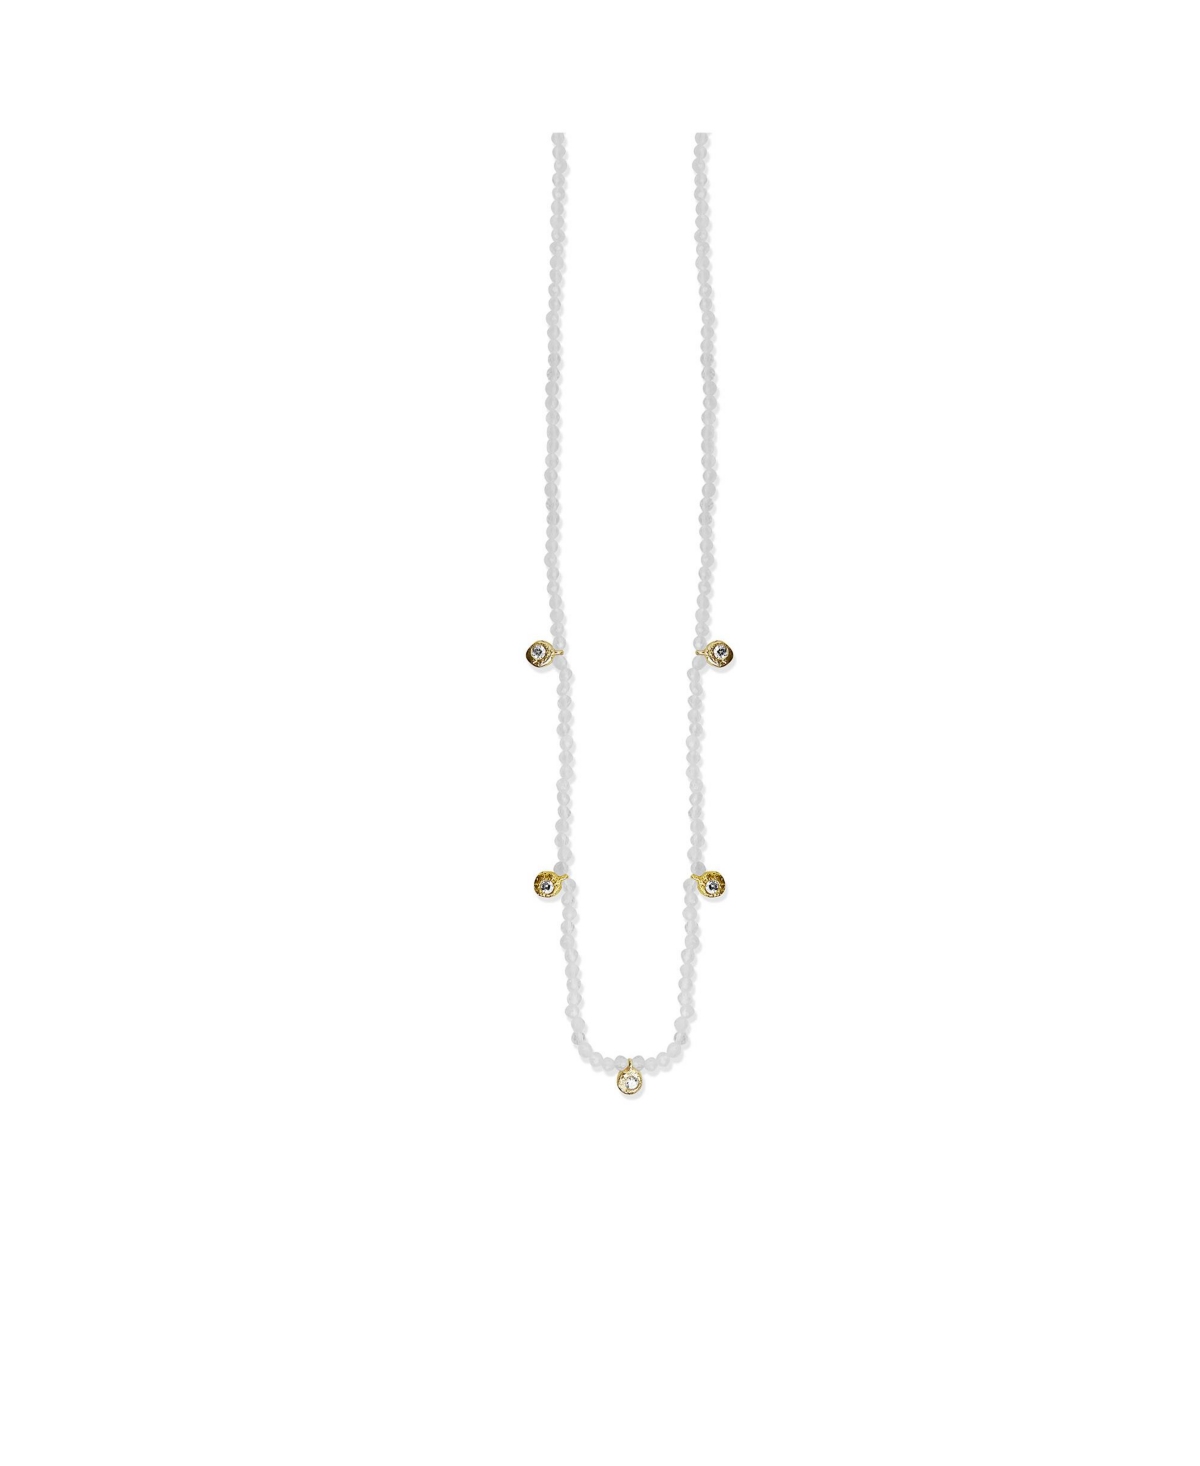 Argento Vivo Sterling Silver White Beaded Necklace in 14k Gold over Sterling Silver